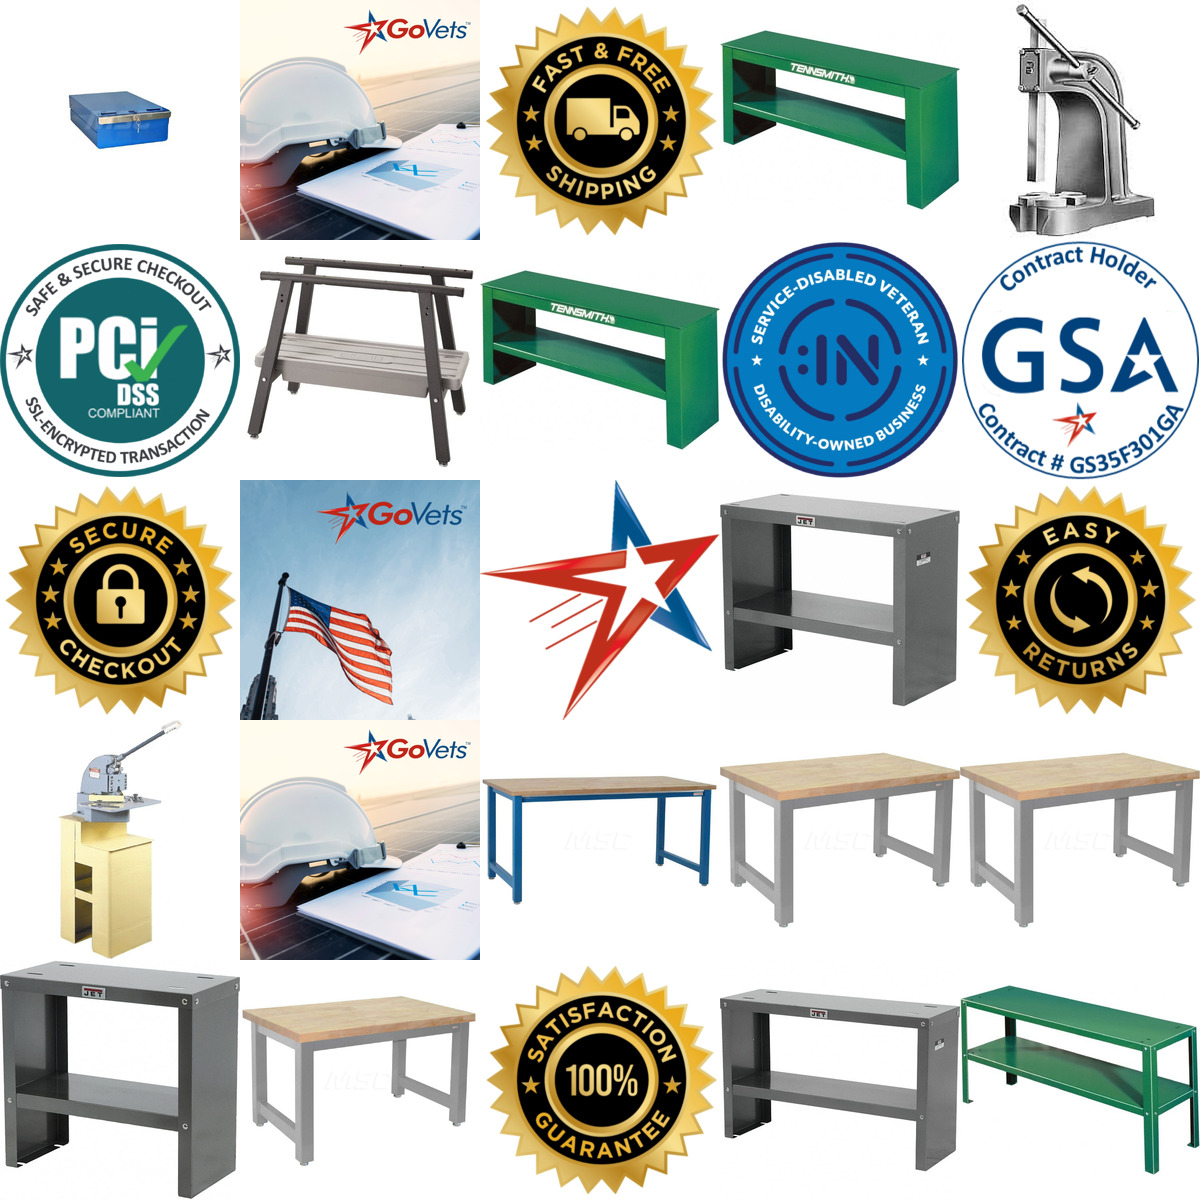 A selection of Metal Cutting and Forming Machine Stands products on GoVets